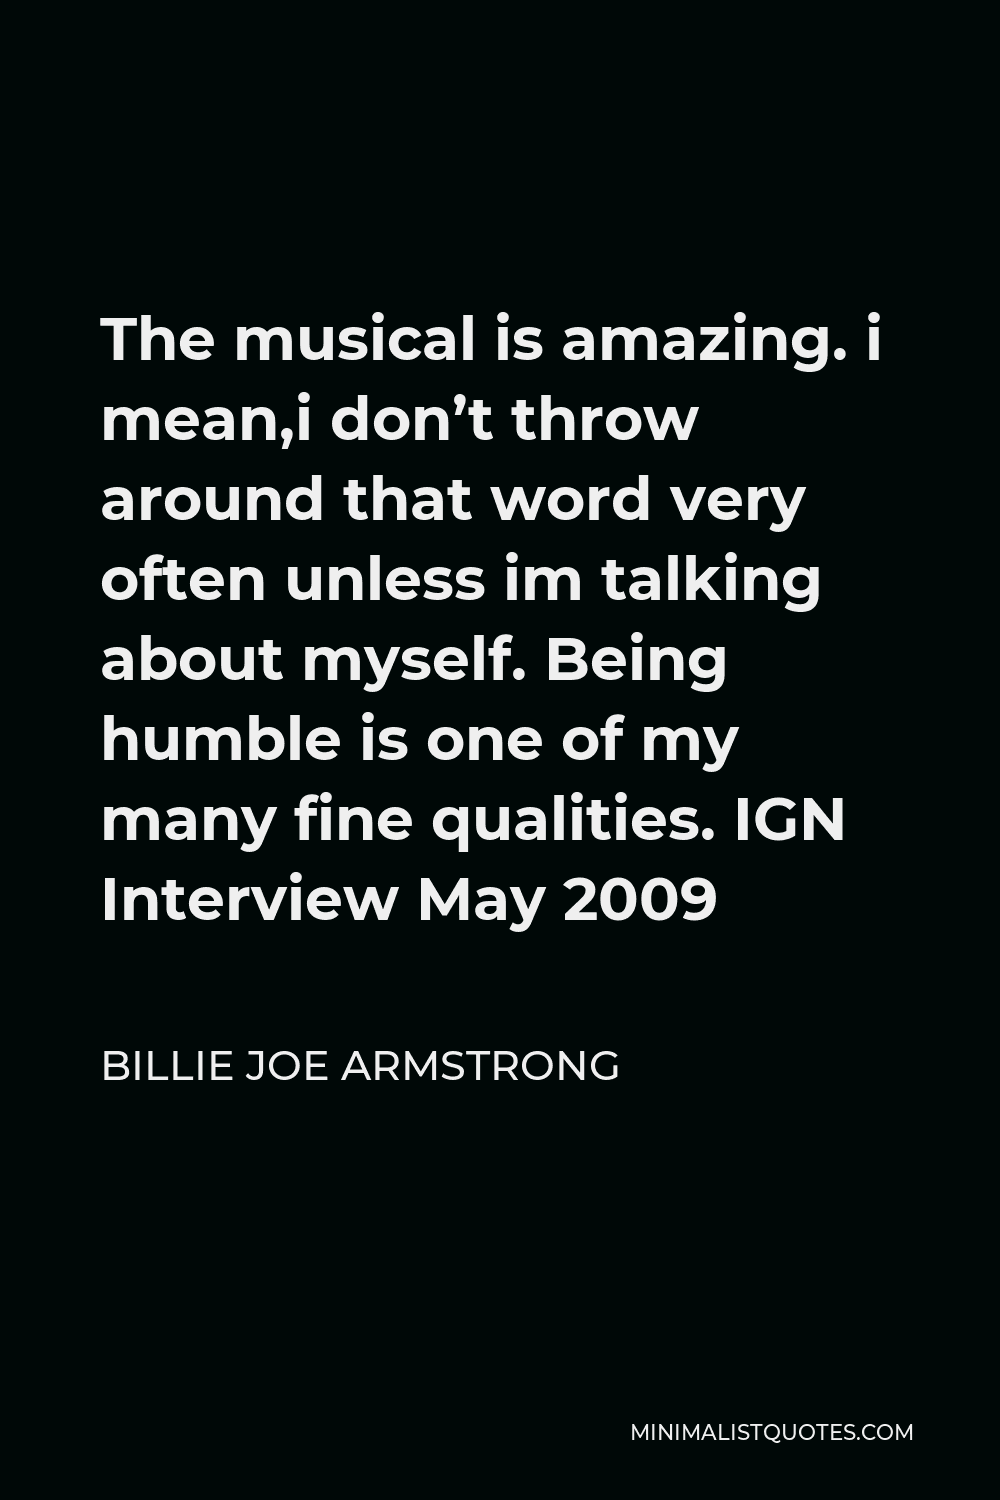 Billie Joe Armstrong Quote - The musical is amazing. i mean,i don’t throw around that word very often unless im talking about myself. Being humble is one of my many fine qualities. IGN Interview May 2009